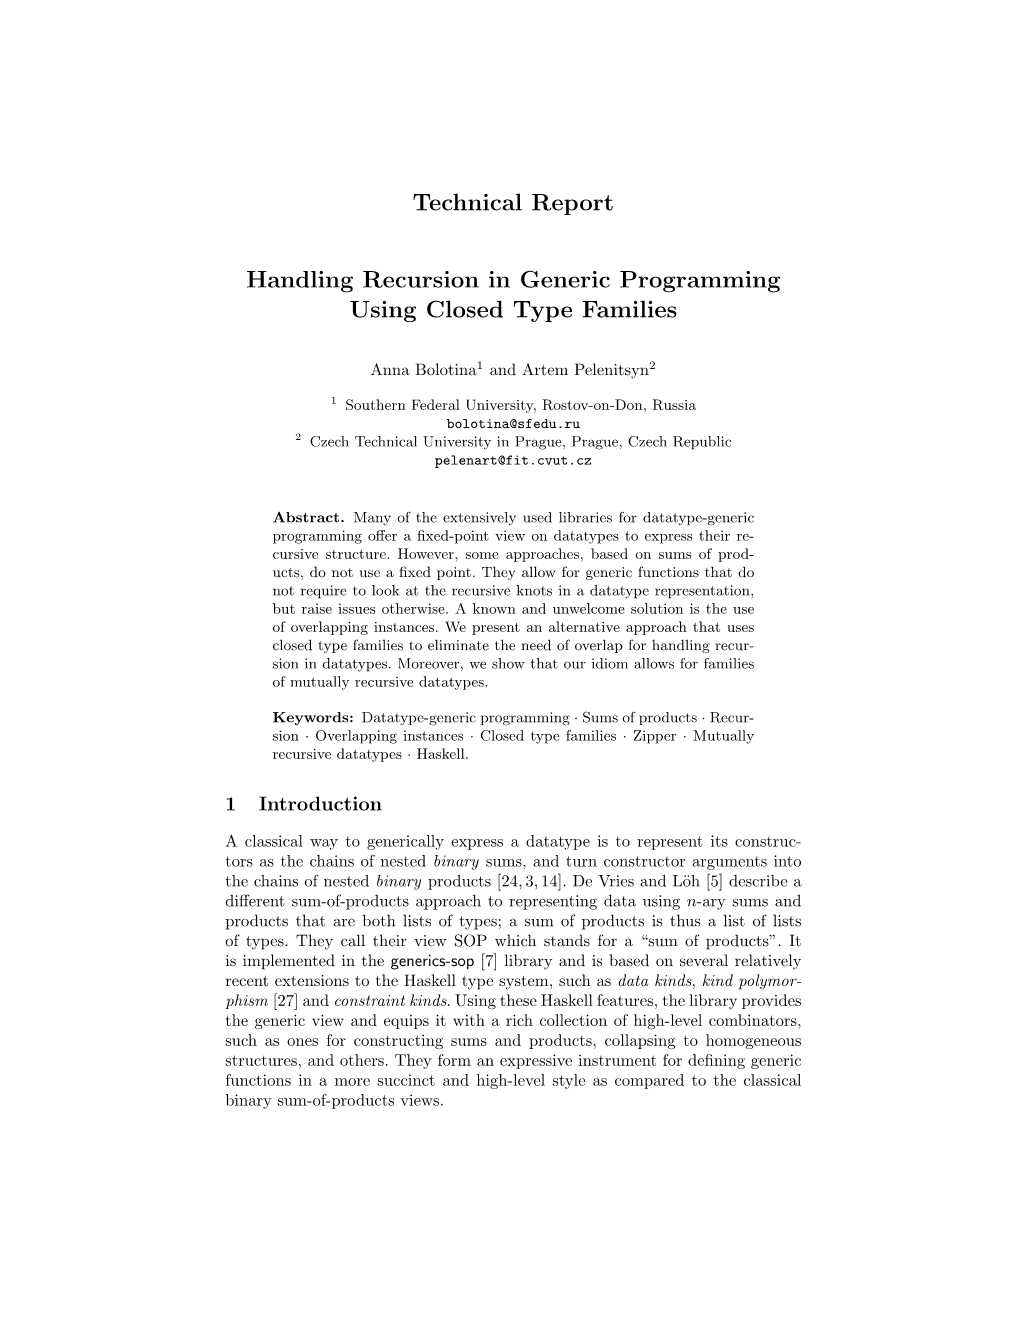 Technical Report Handling Recursion in Generic Programming Using Closed Type Families